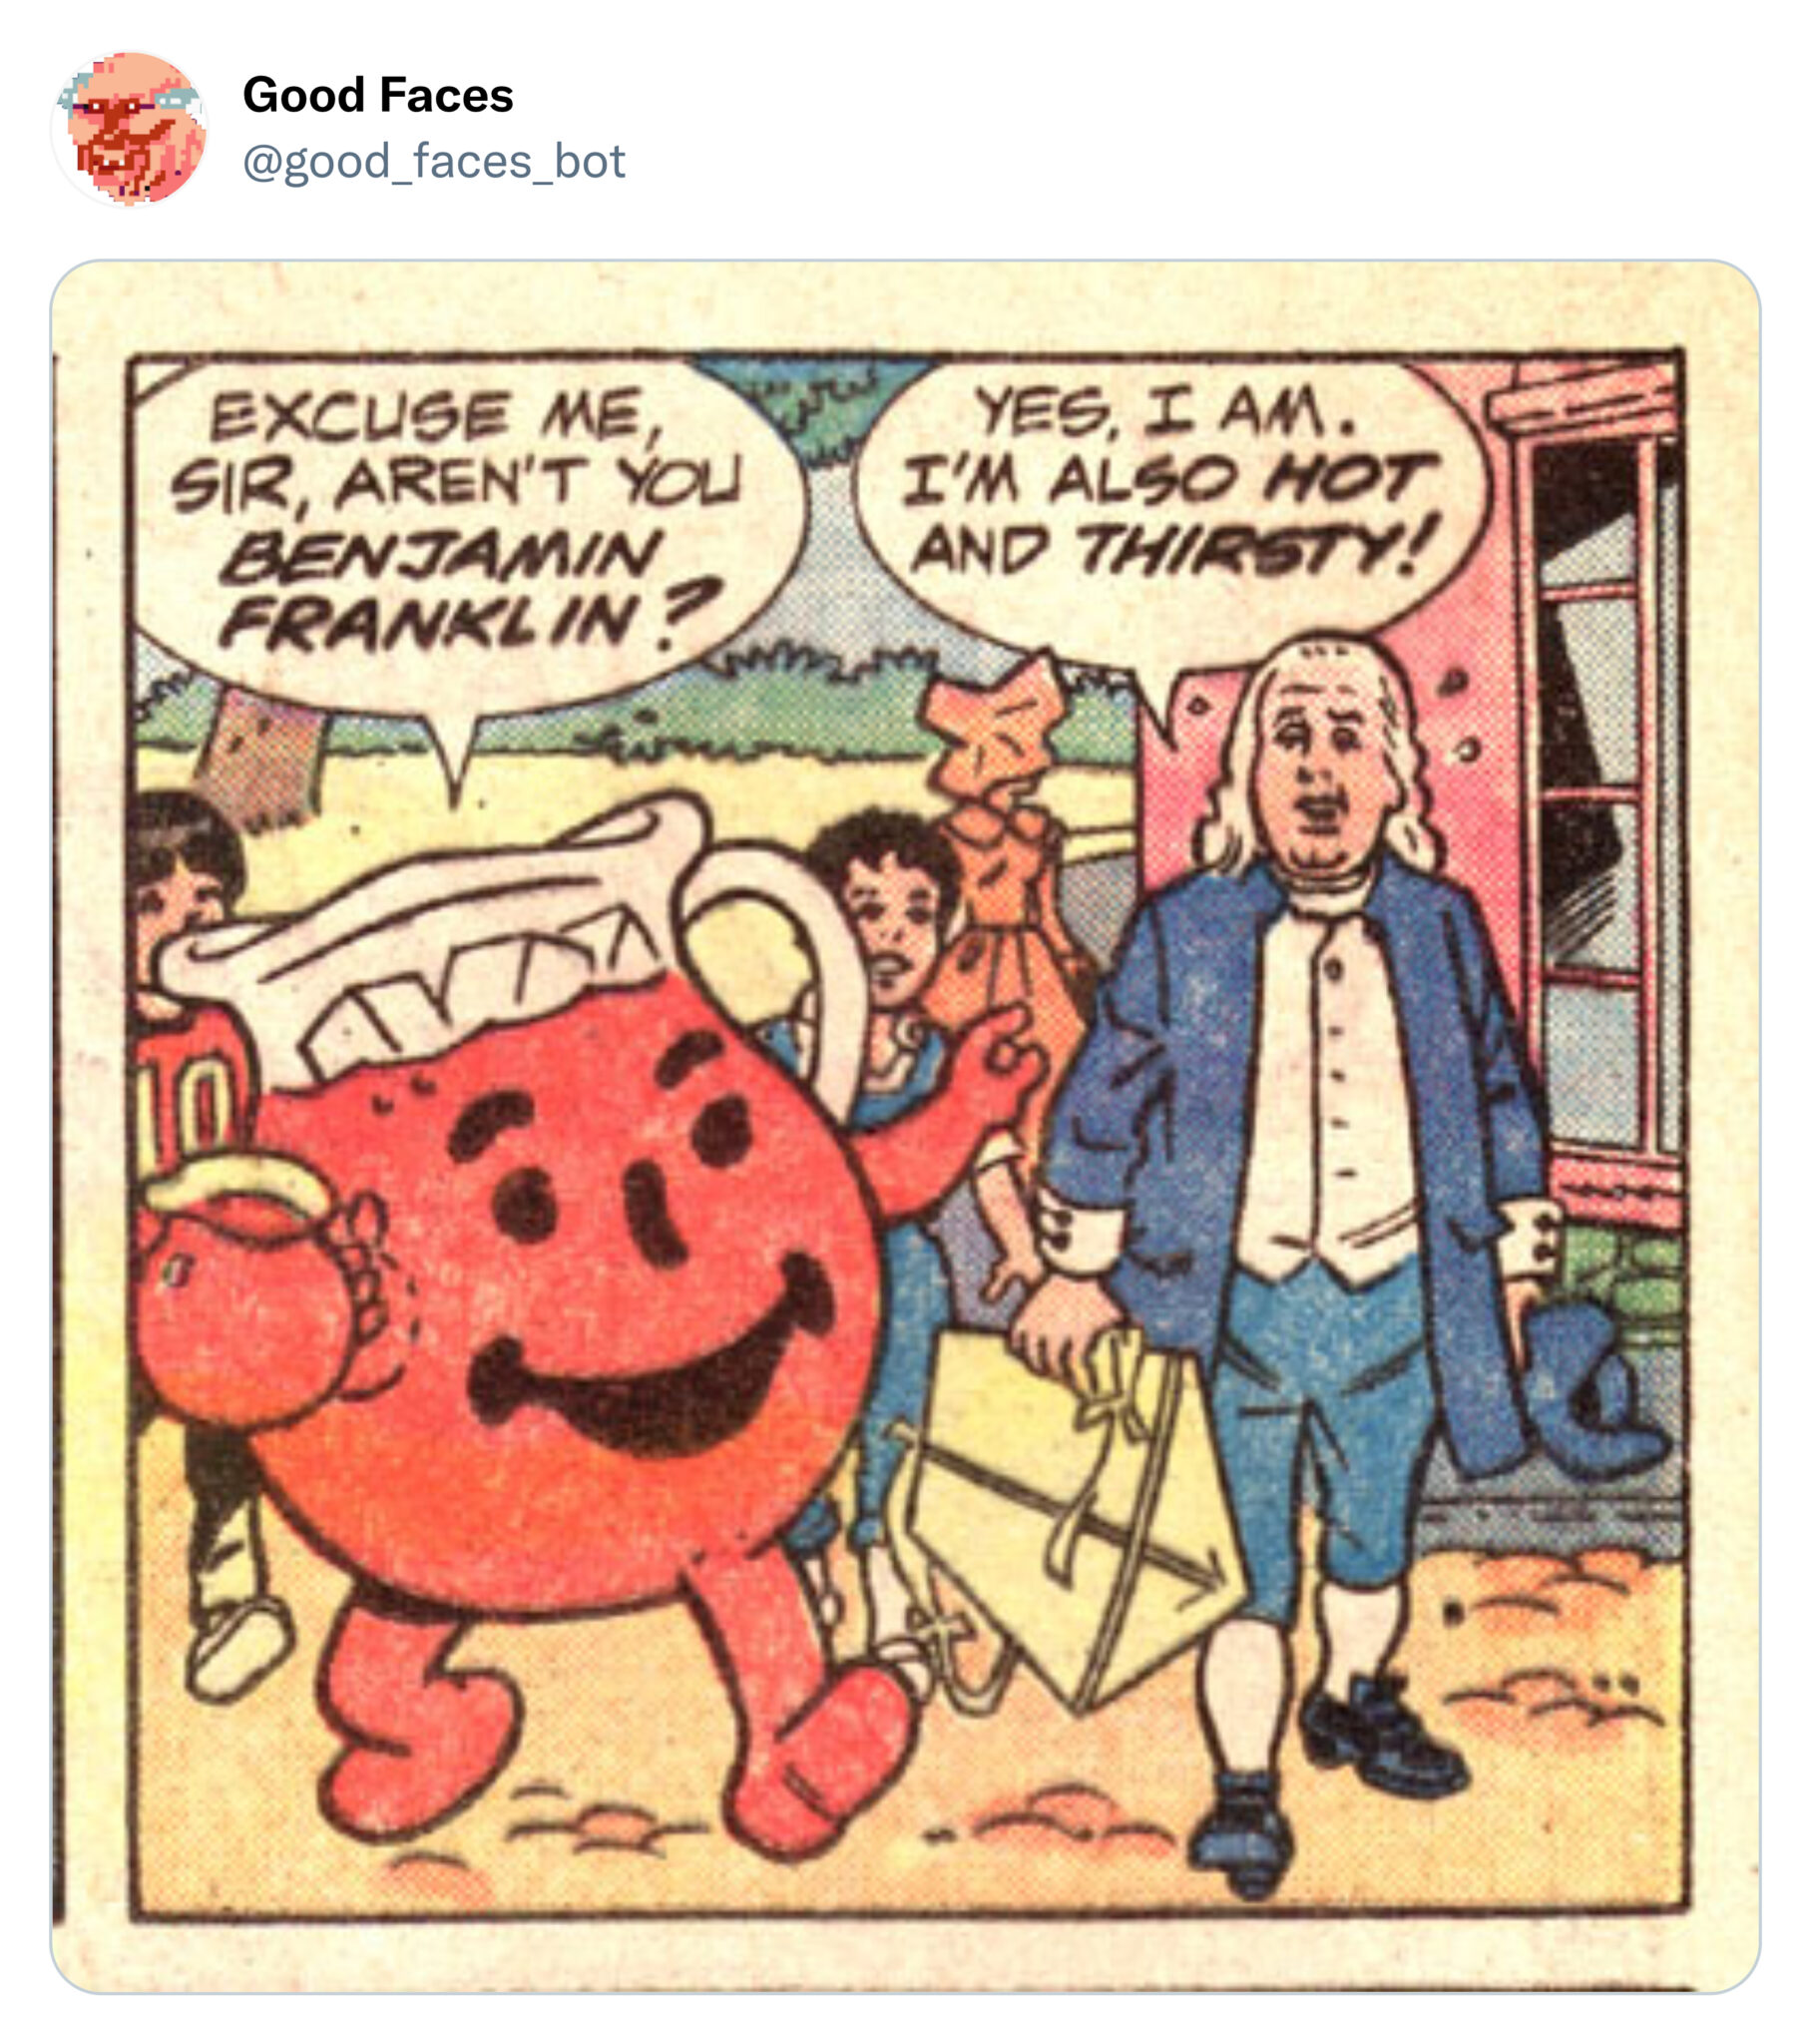 funny tweets - kool aid man benjamin franklin - Good Faces Excuse Me, Sir, Aren'T You Benjamin Franklin? Yes, I Am. I'M Also Hot And Thirsty!